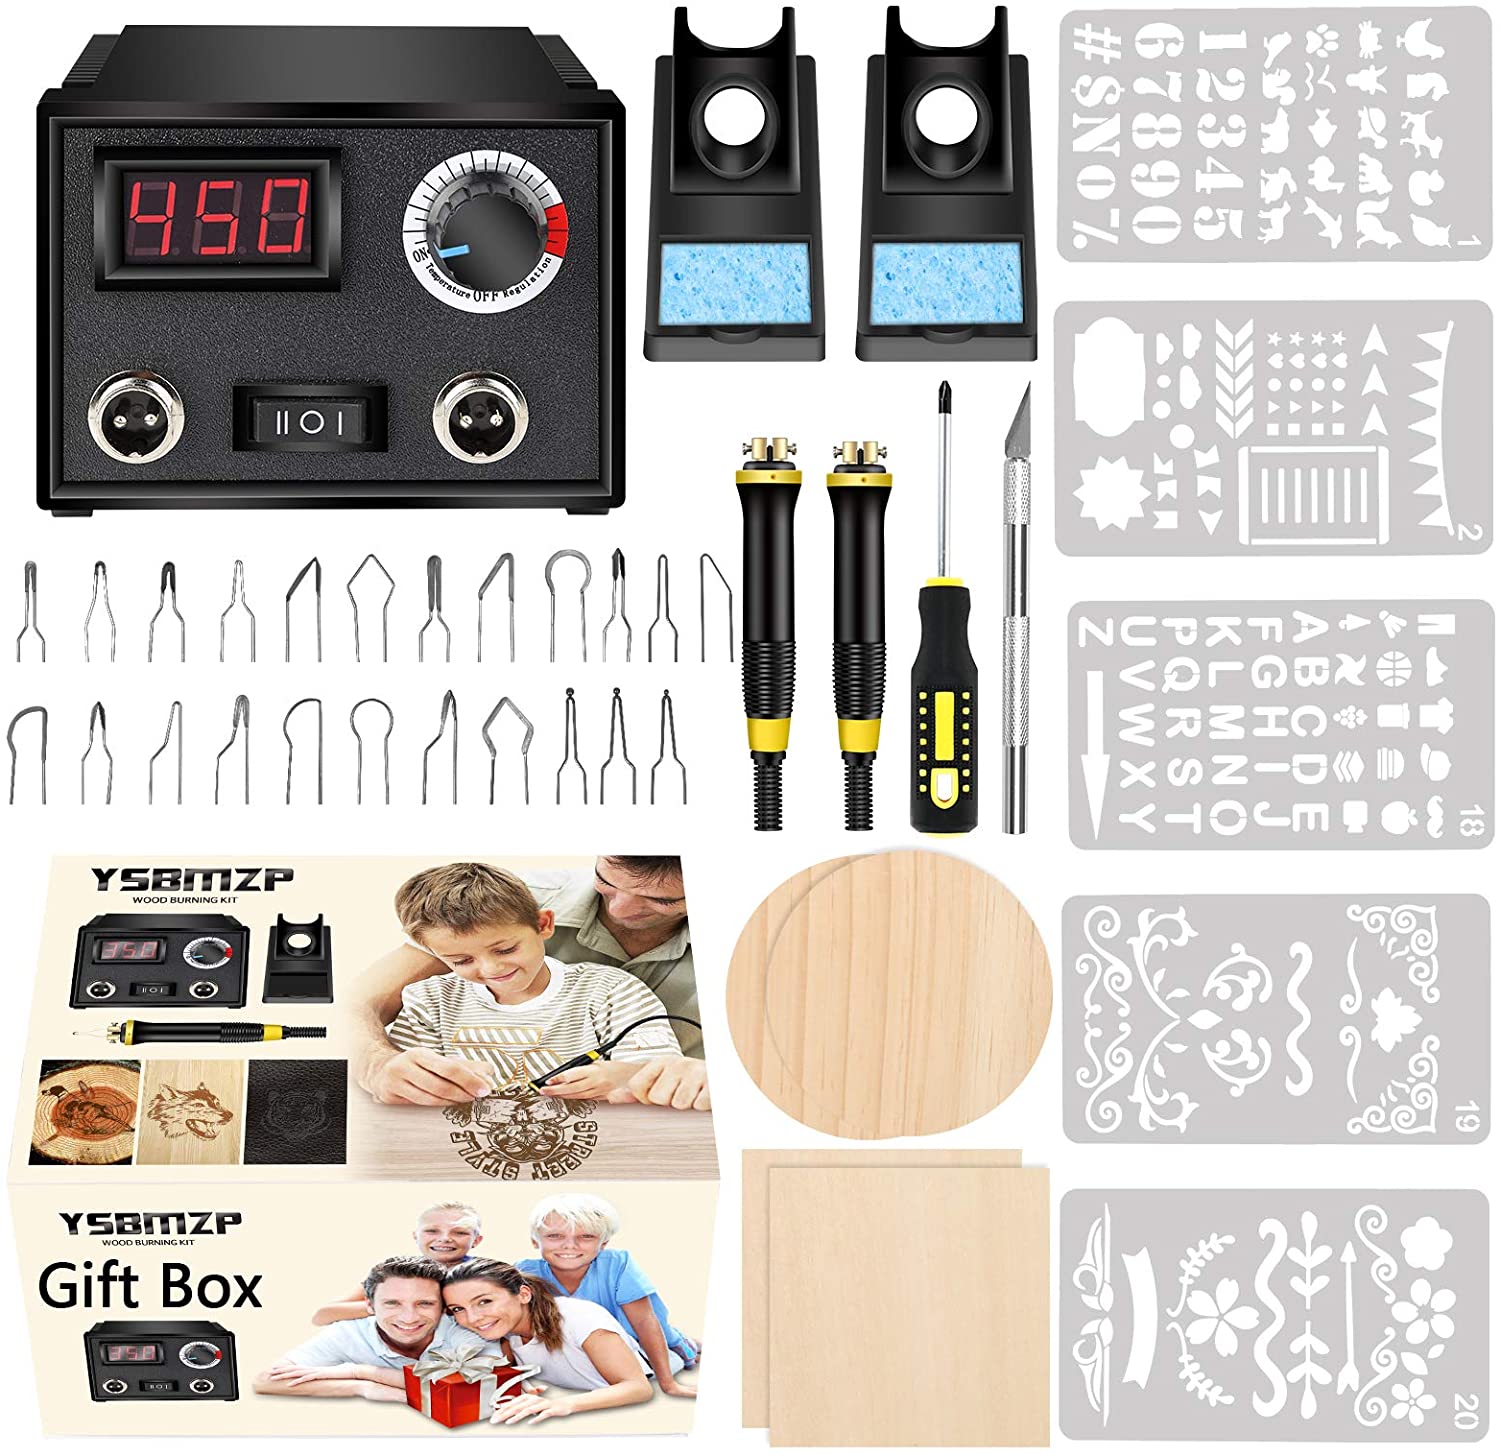 TEKCHIC 60W Professional Wood Burning Kit Pro Wood Burner Pyrography Tool  with 20 Wire Nibs Tips Including Ball Tips